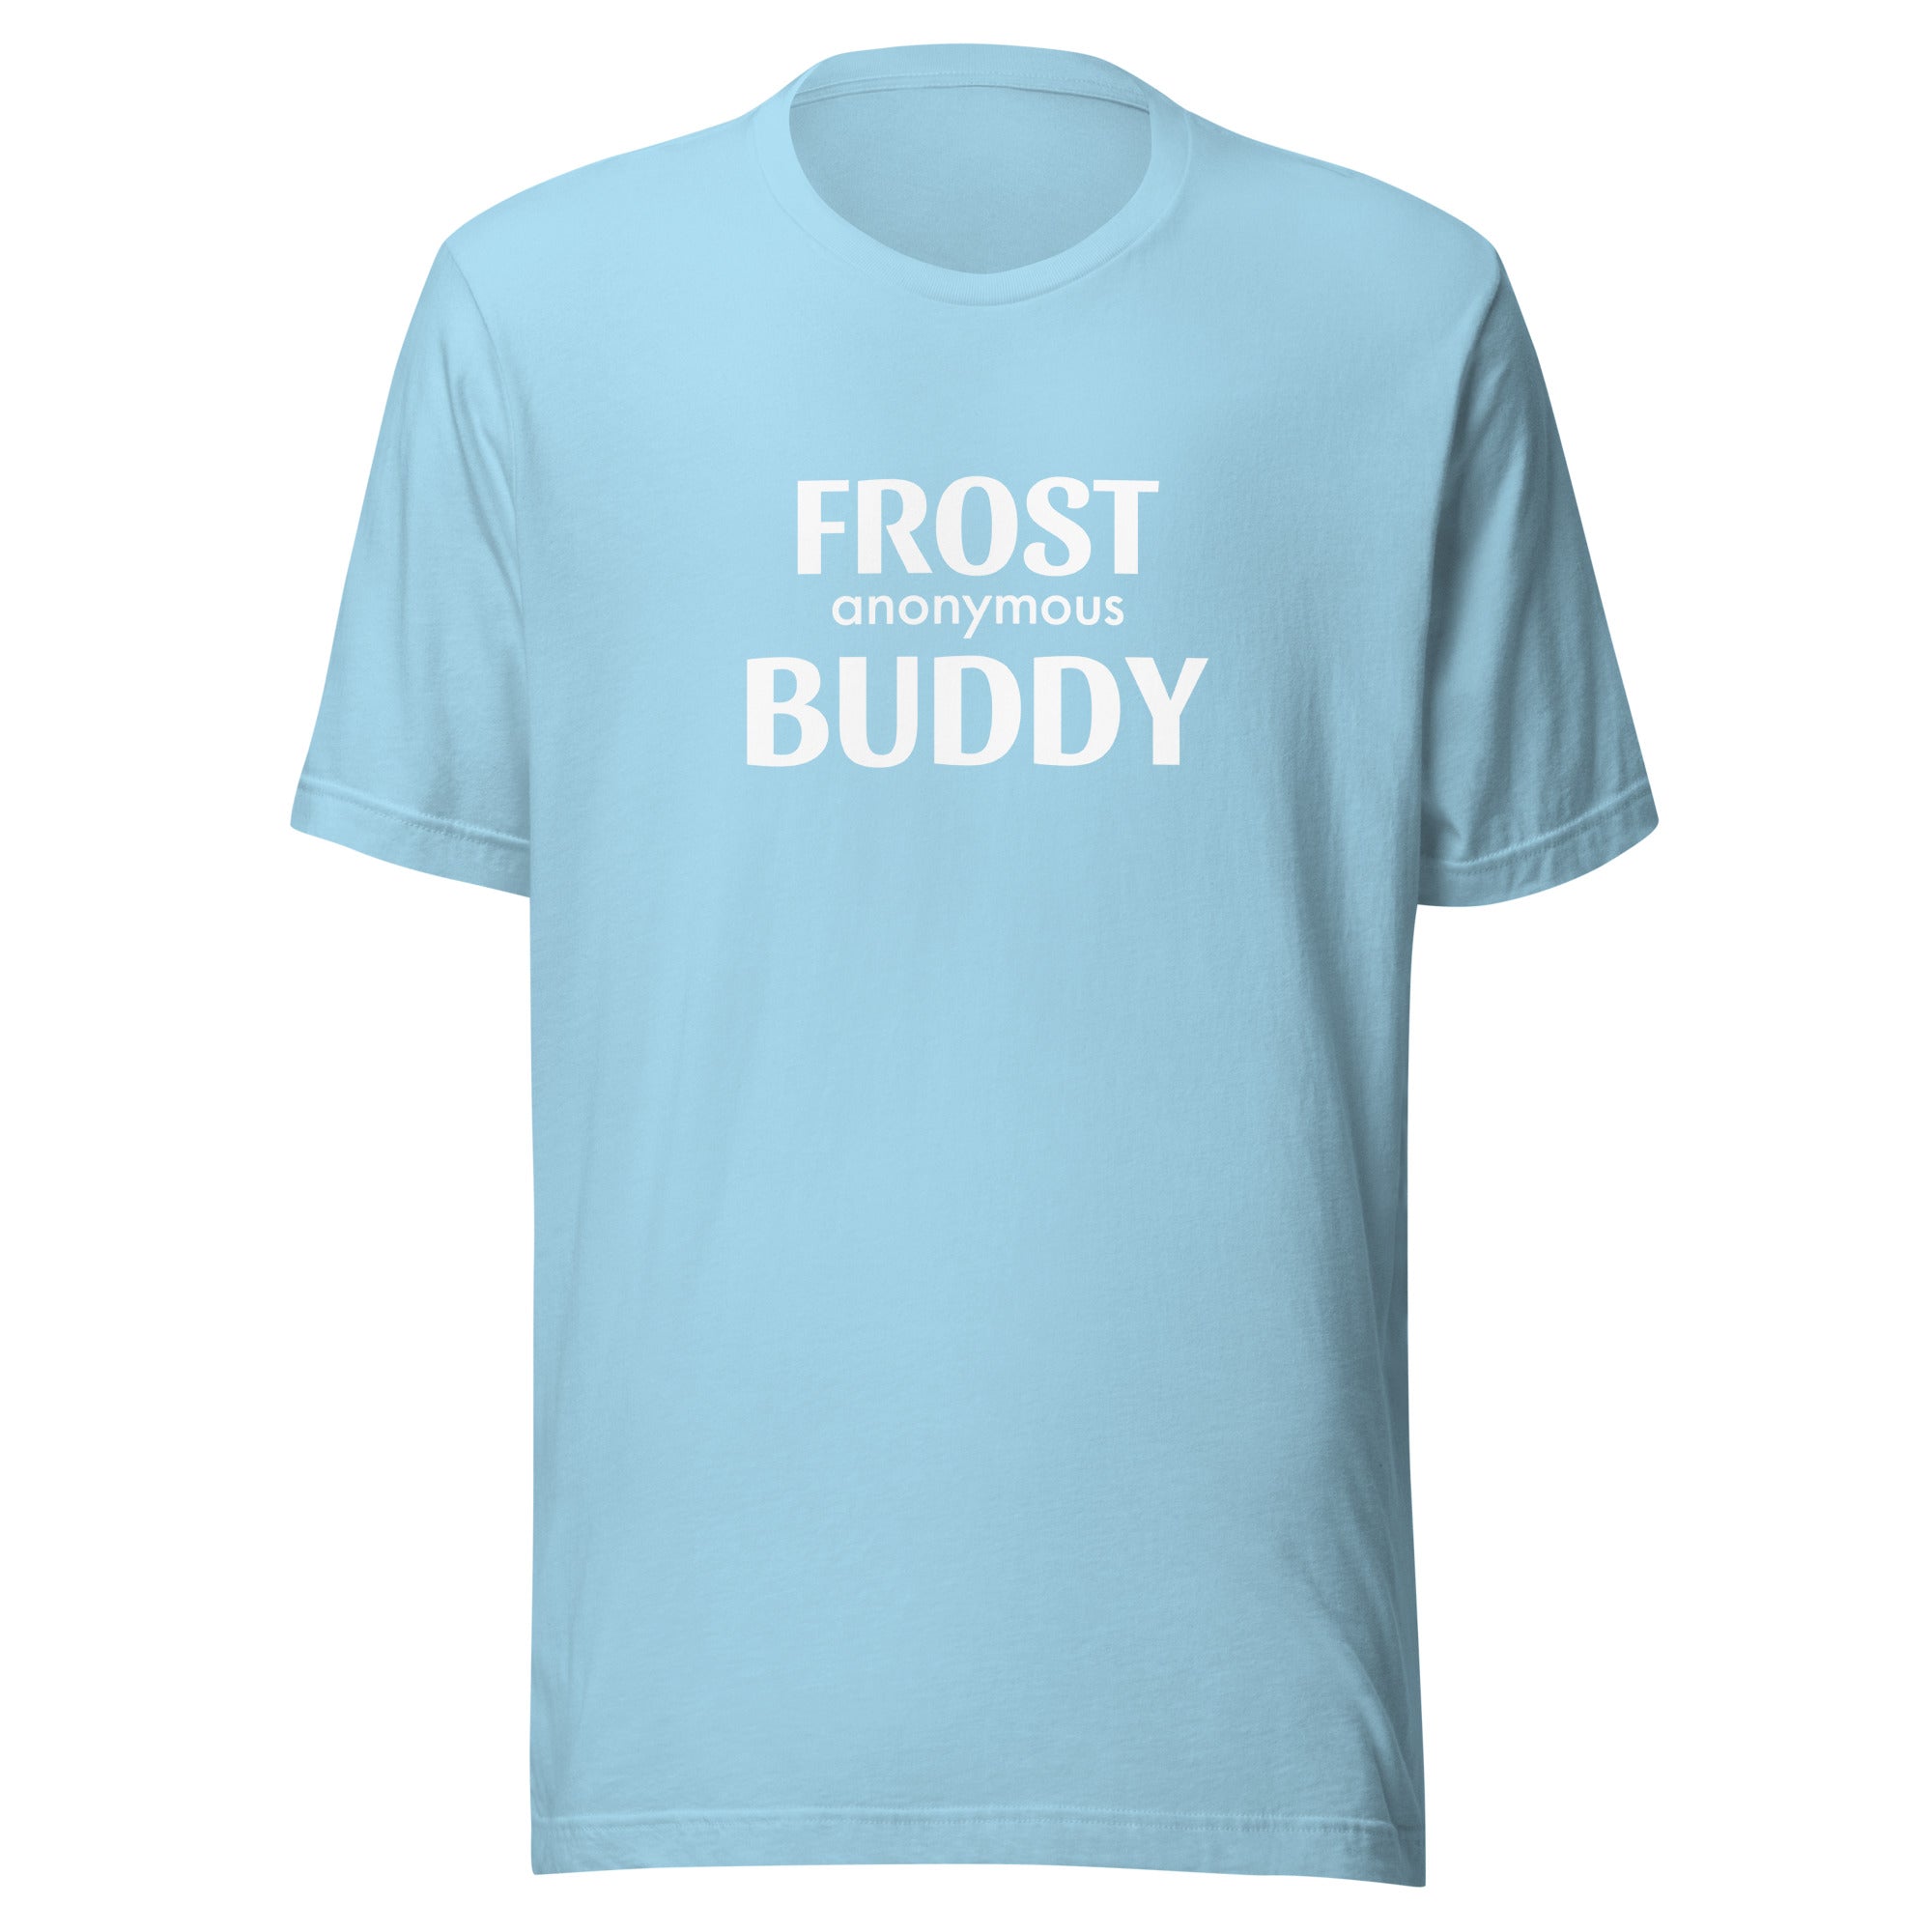 Frost Buddy  Ocean Blue / S Frost Buddy Anonymous Unisex T-shirt